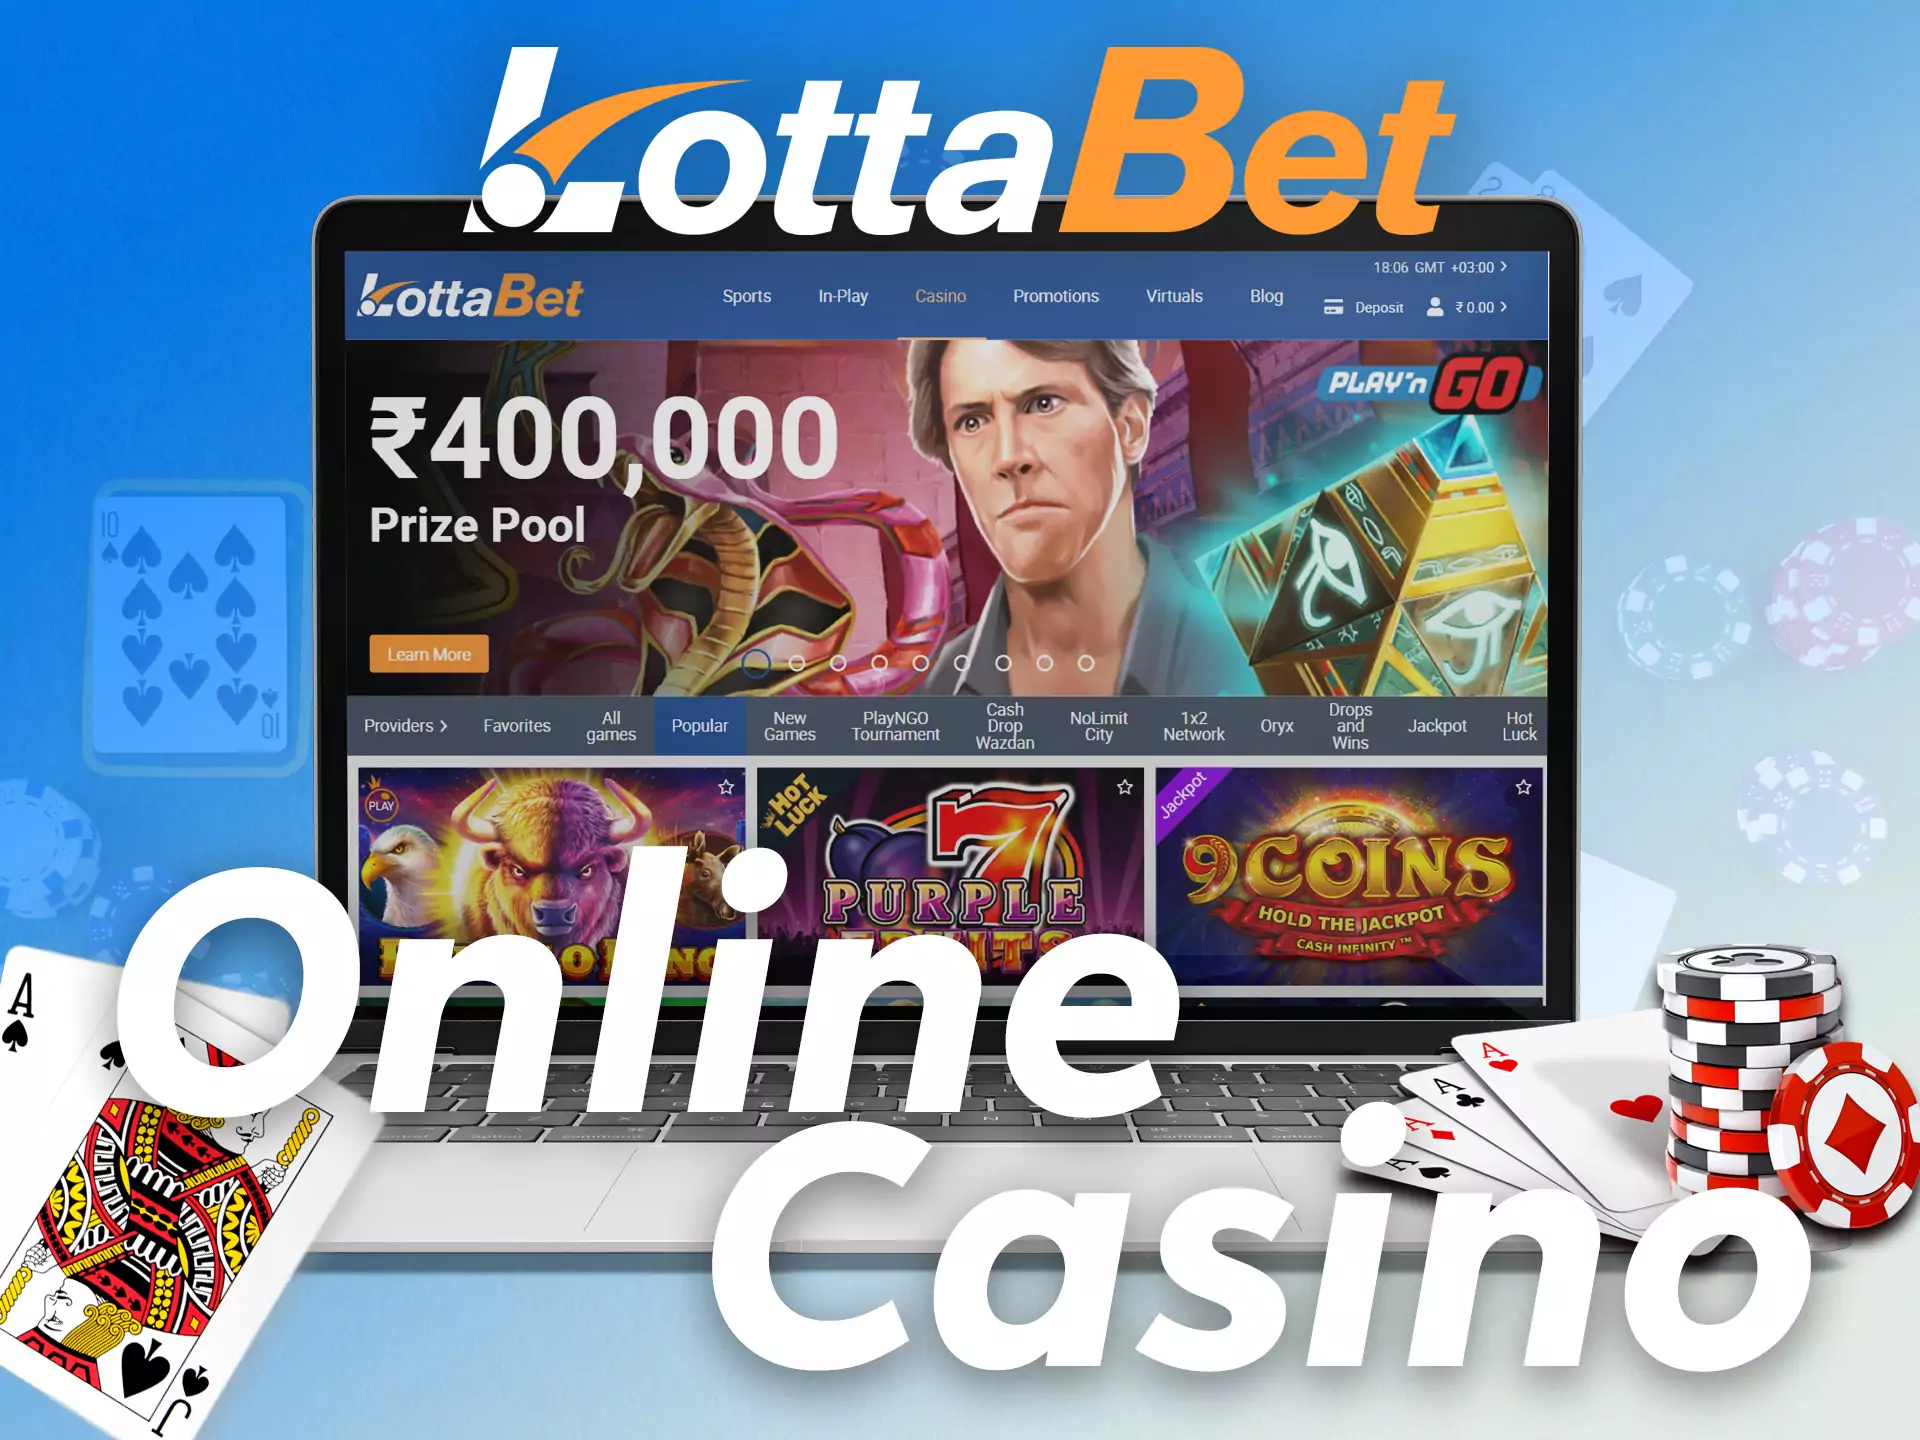 Besides betting on sports, an online casino is presented on the Lottabet website.